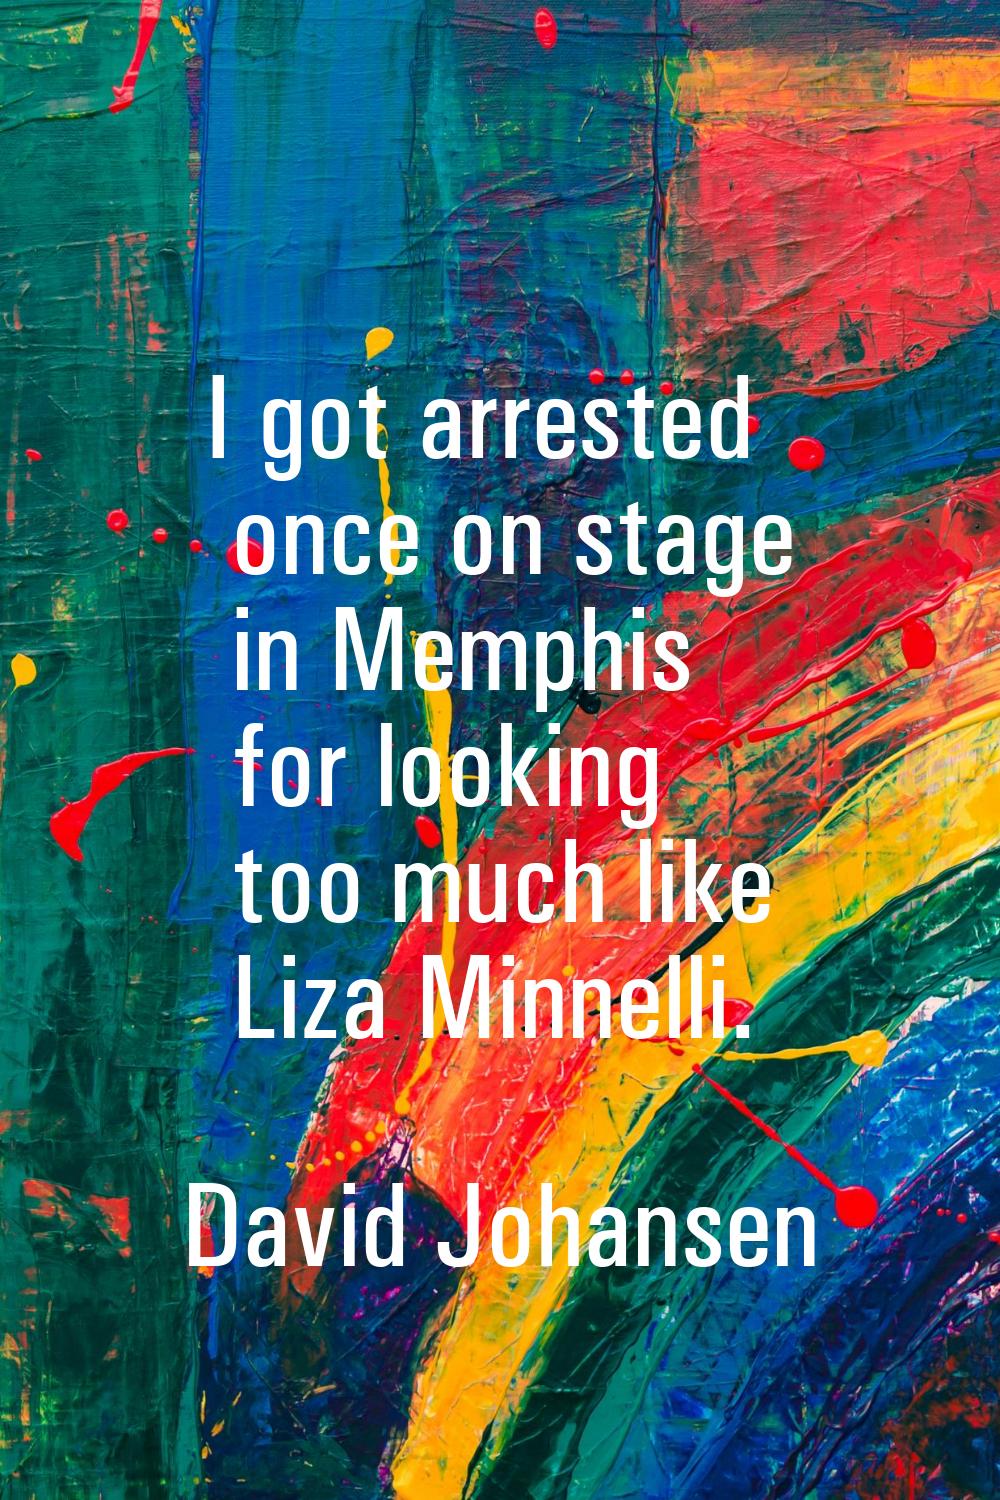 I got arrested once on stage in Memphis for looking too much like Liza Minnelli.